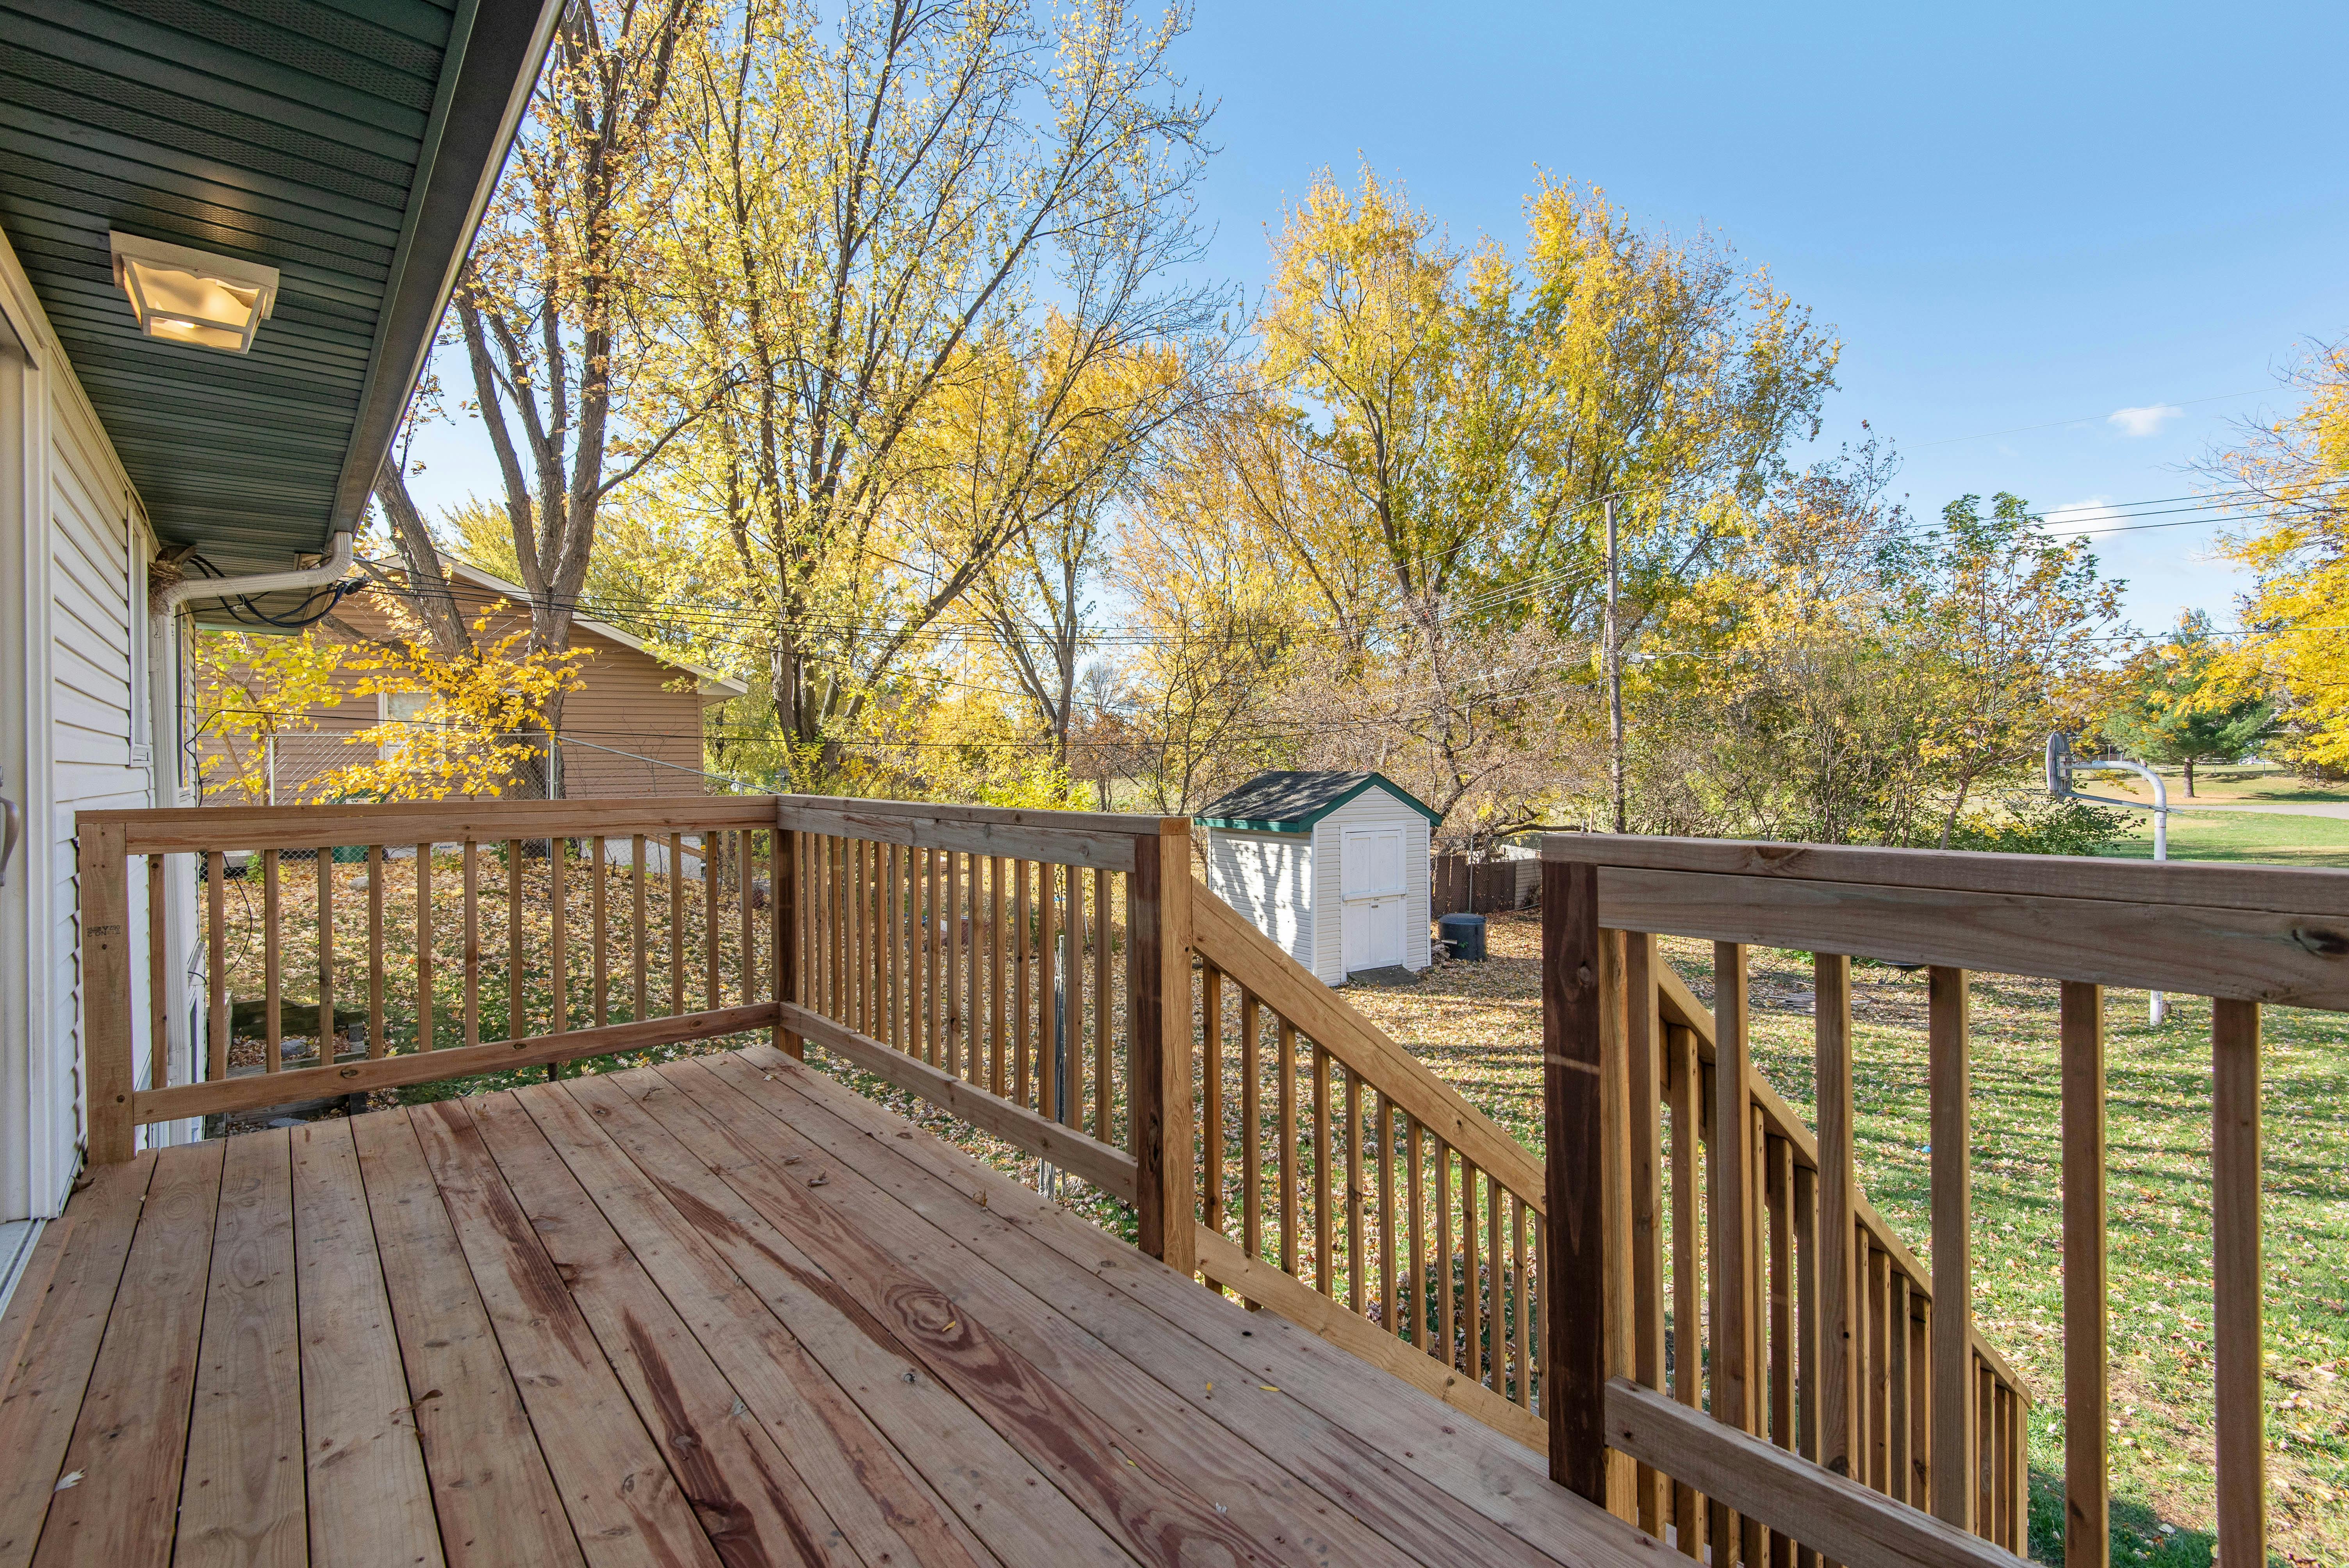 Picture of a backyard deck